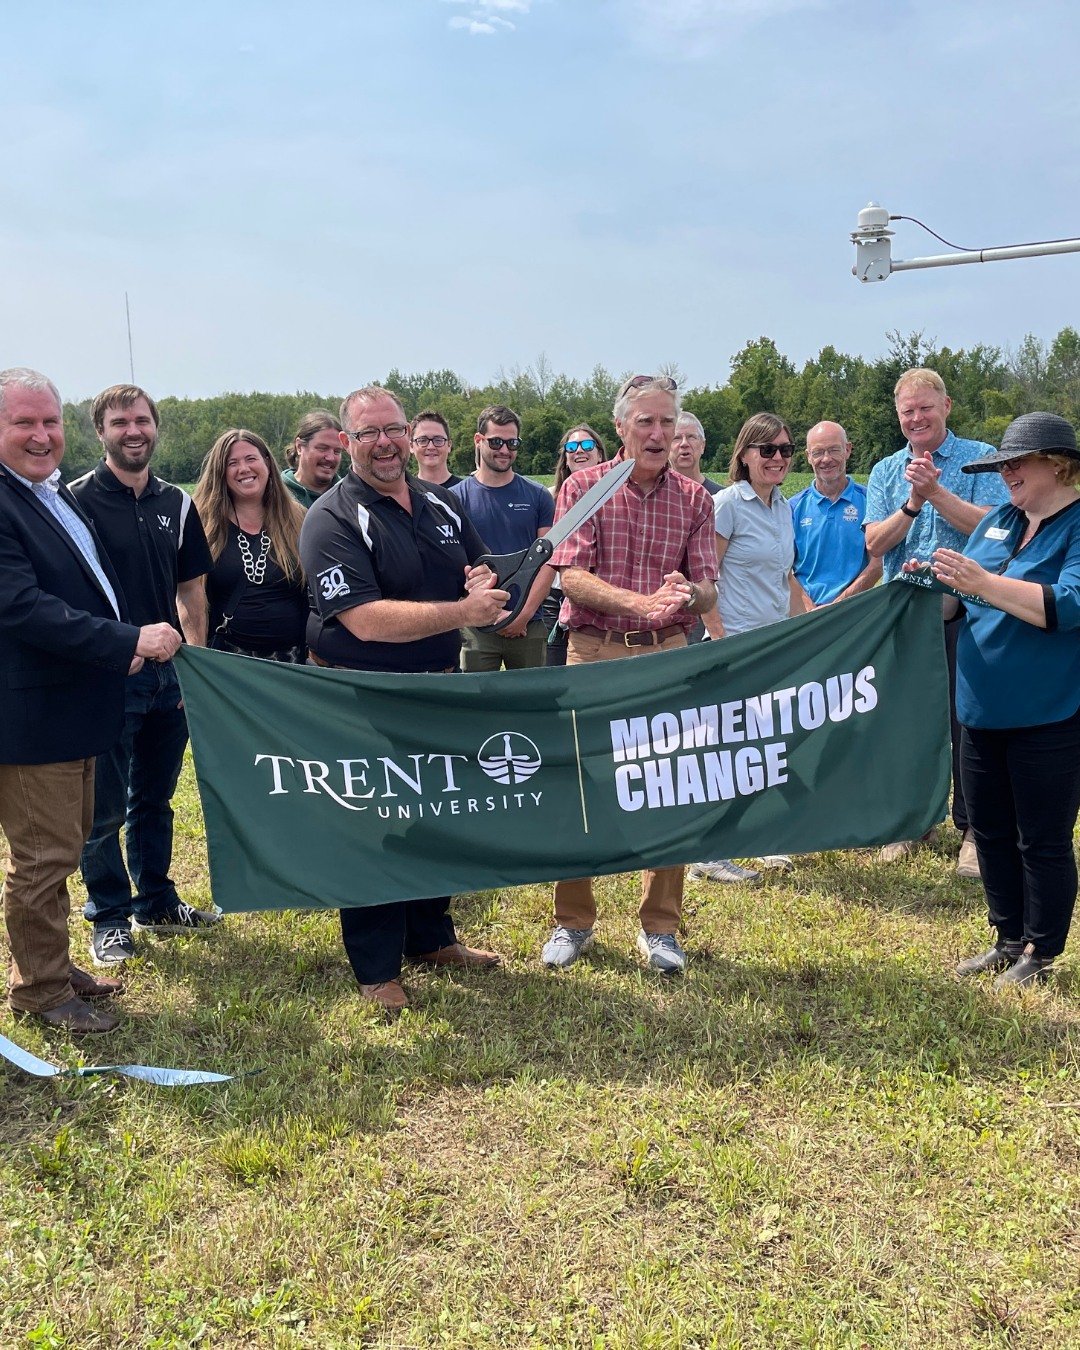 Celebrating TRENT DAY at Wills. Today we celebrate our ongoing partnership with Trent University, working together on various projects, employing several Trent alumni, and most recently, our involvement in the Trent Climate Station. 

We love celebra